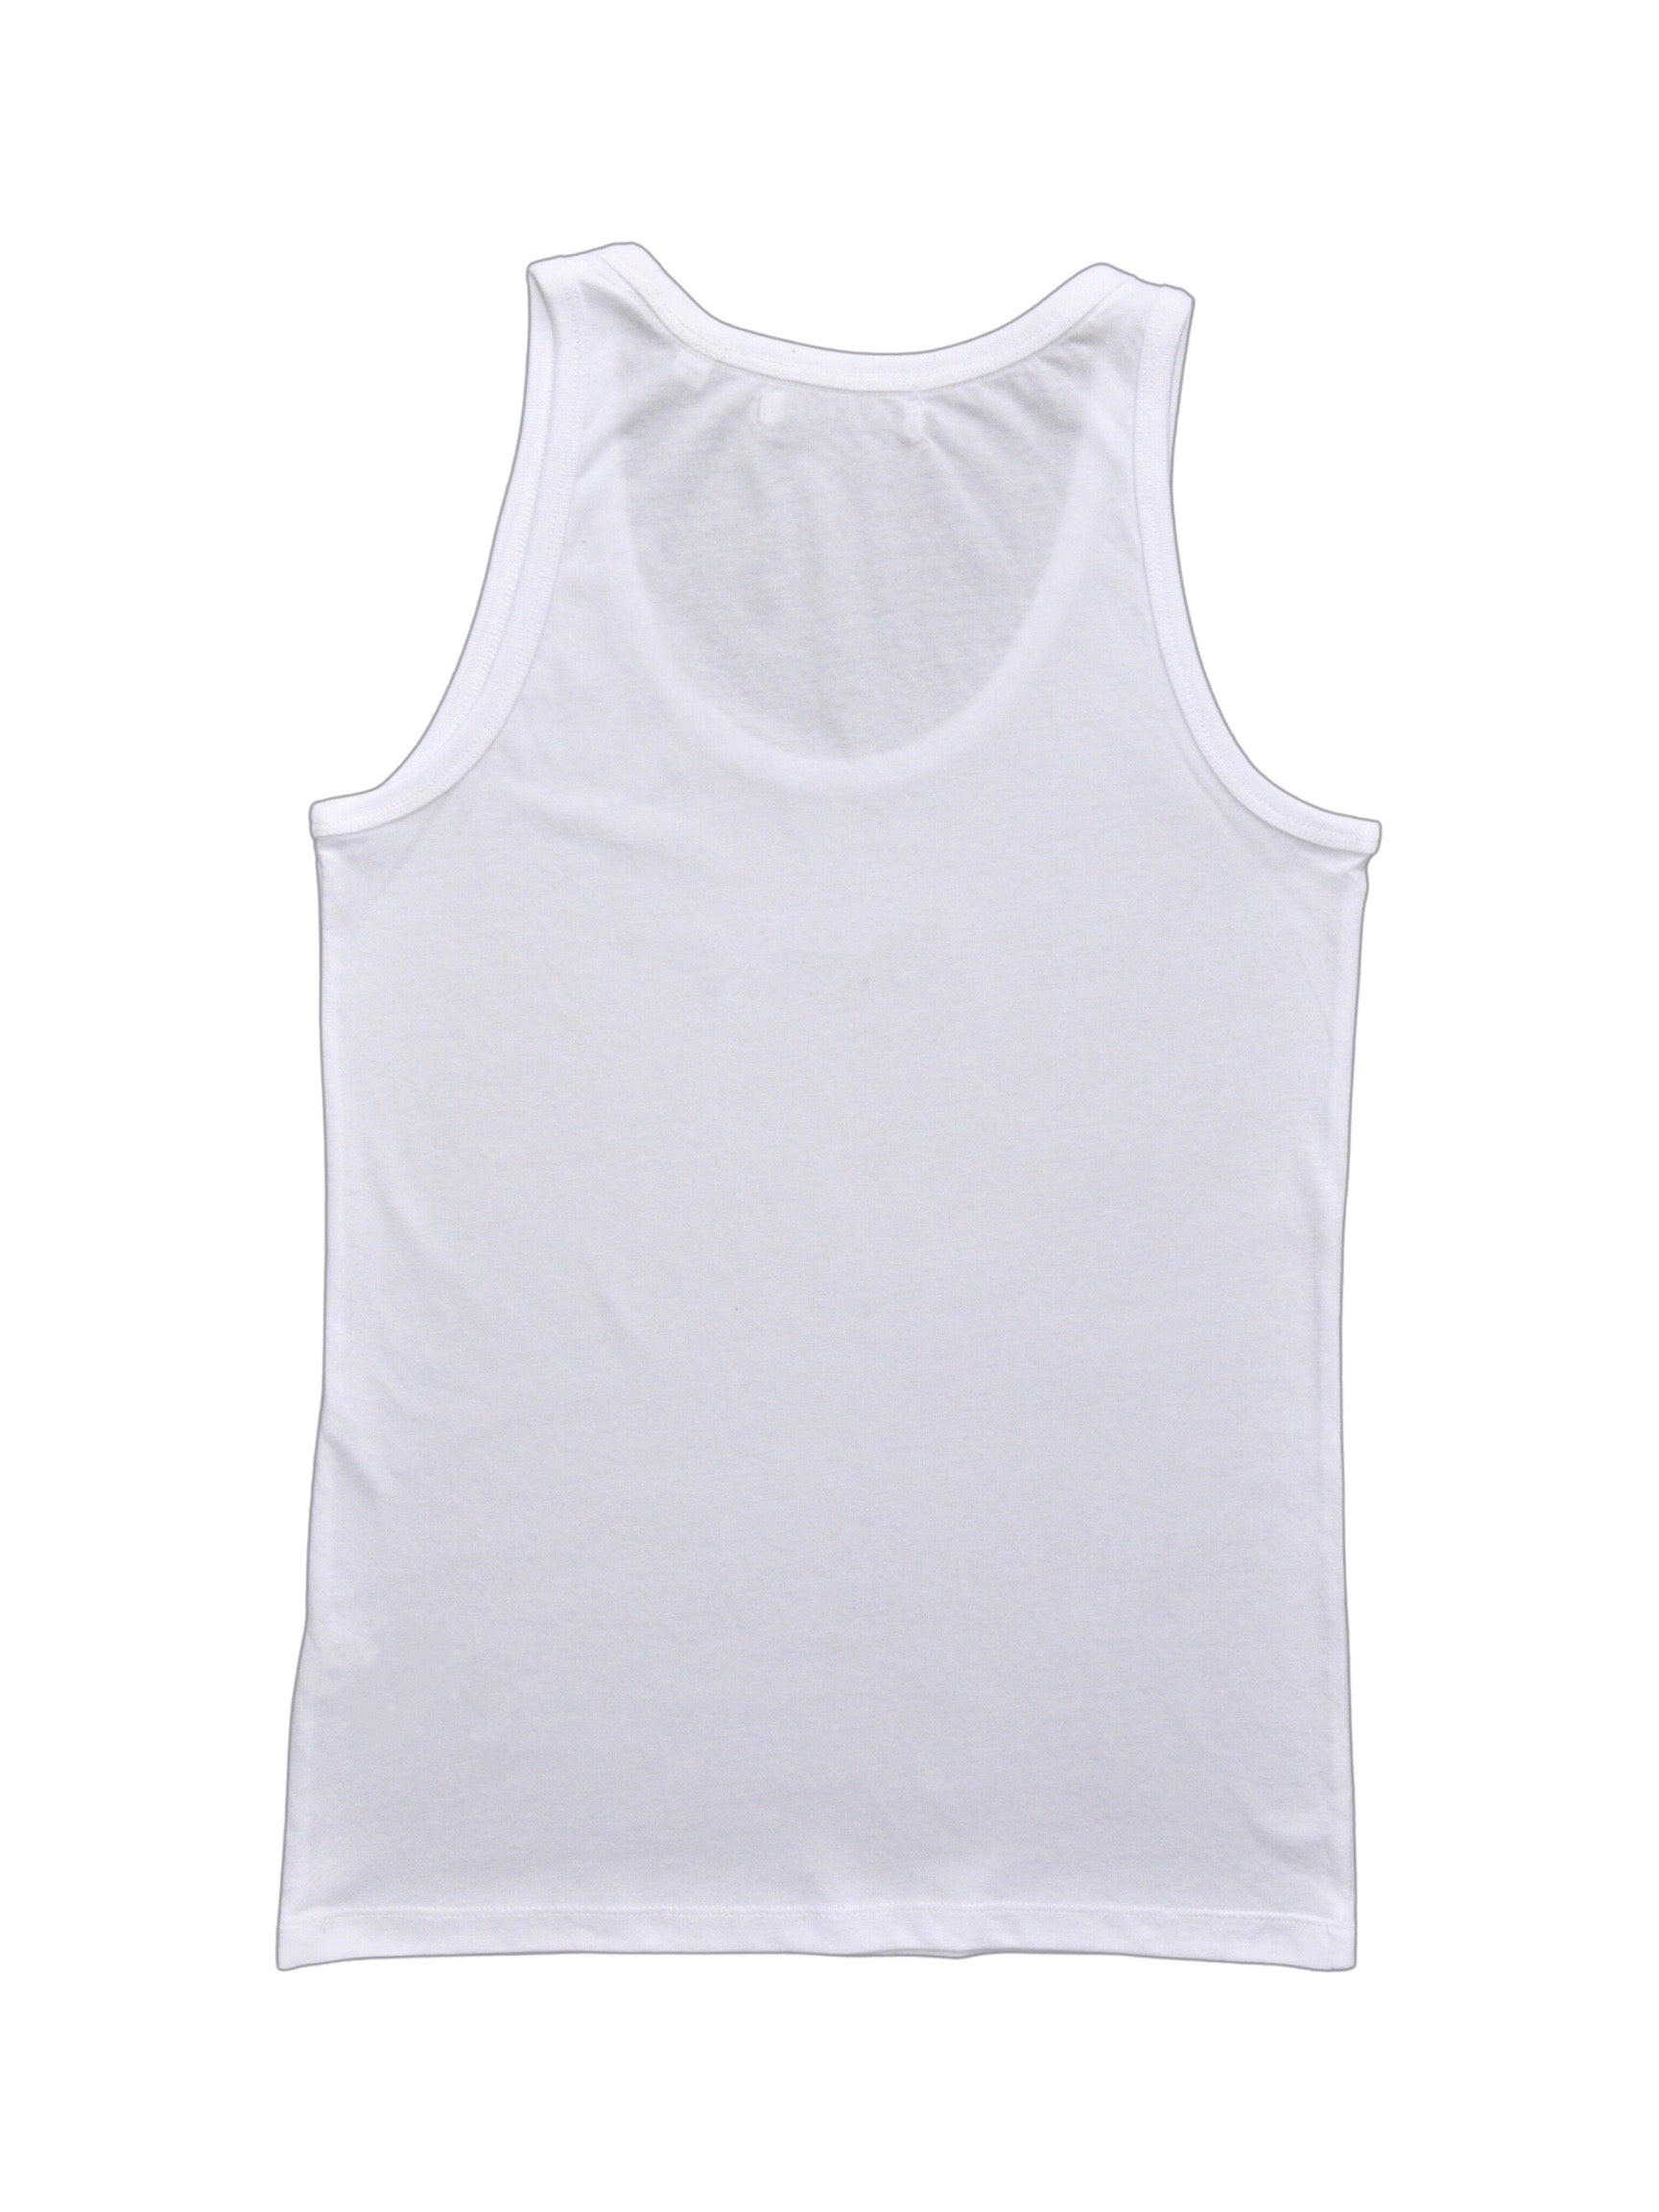 BY11 MUSES Organic Embroidered Tank -White